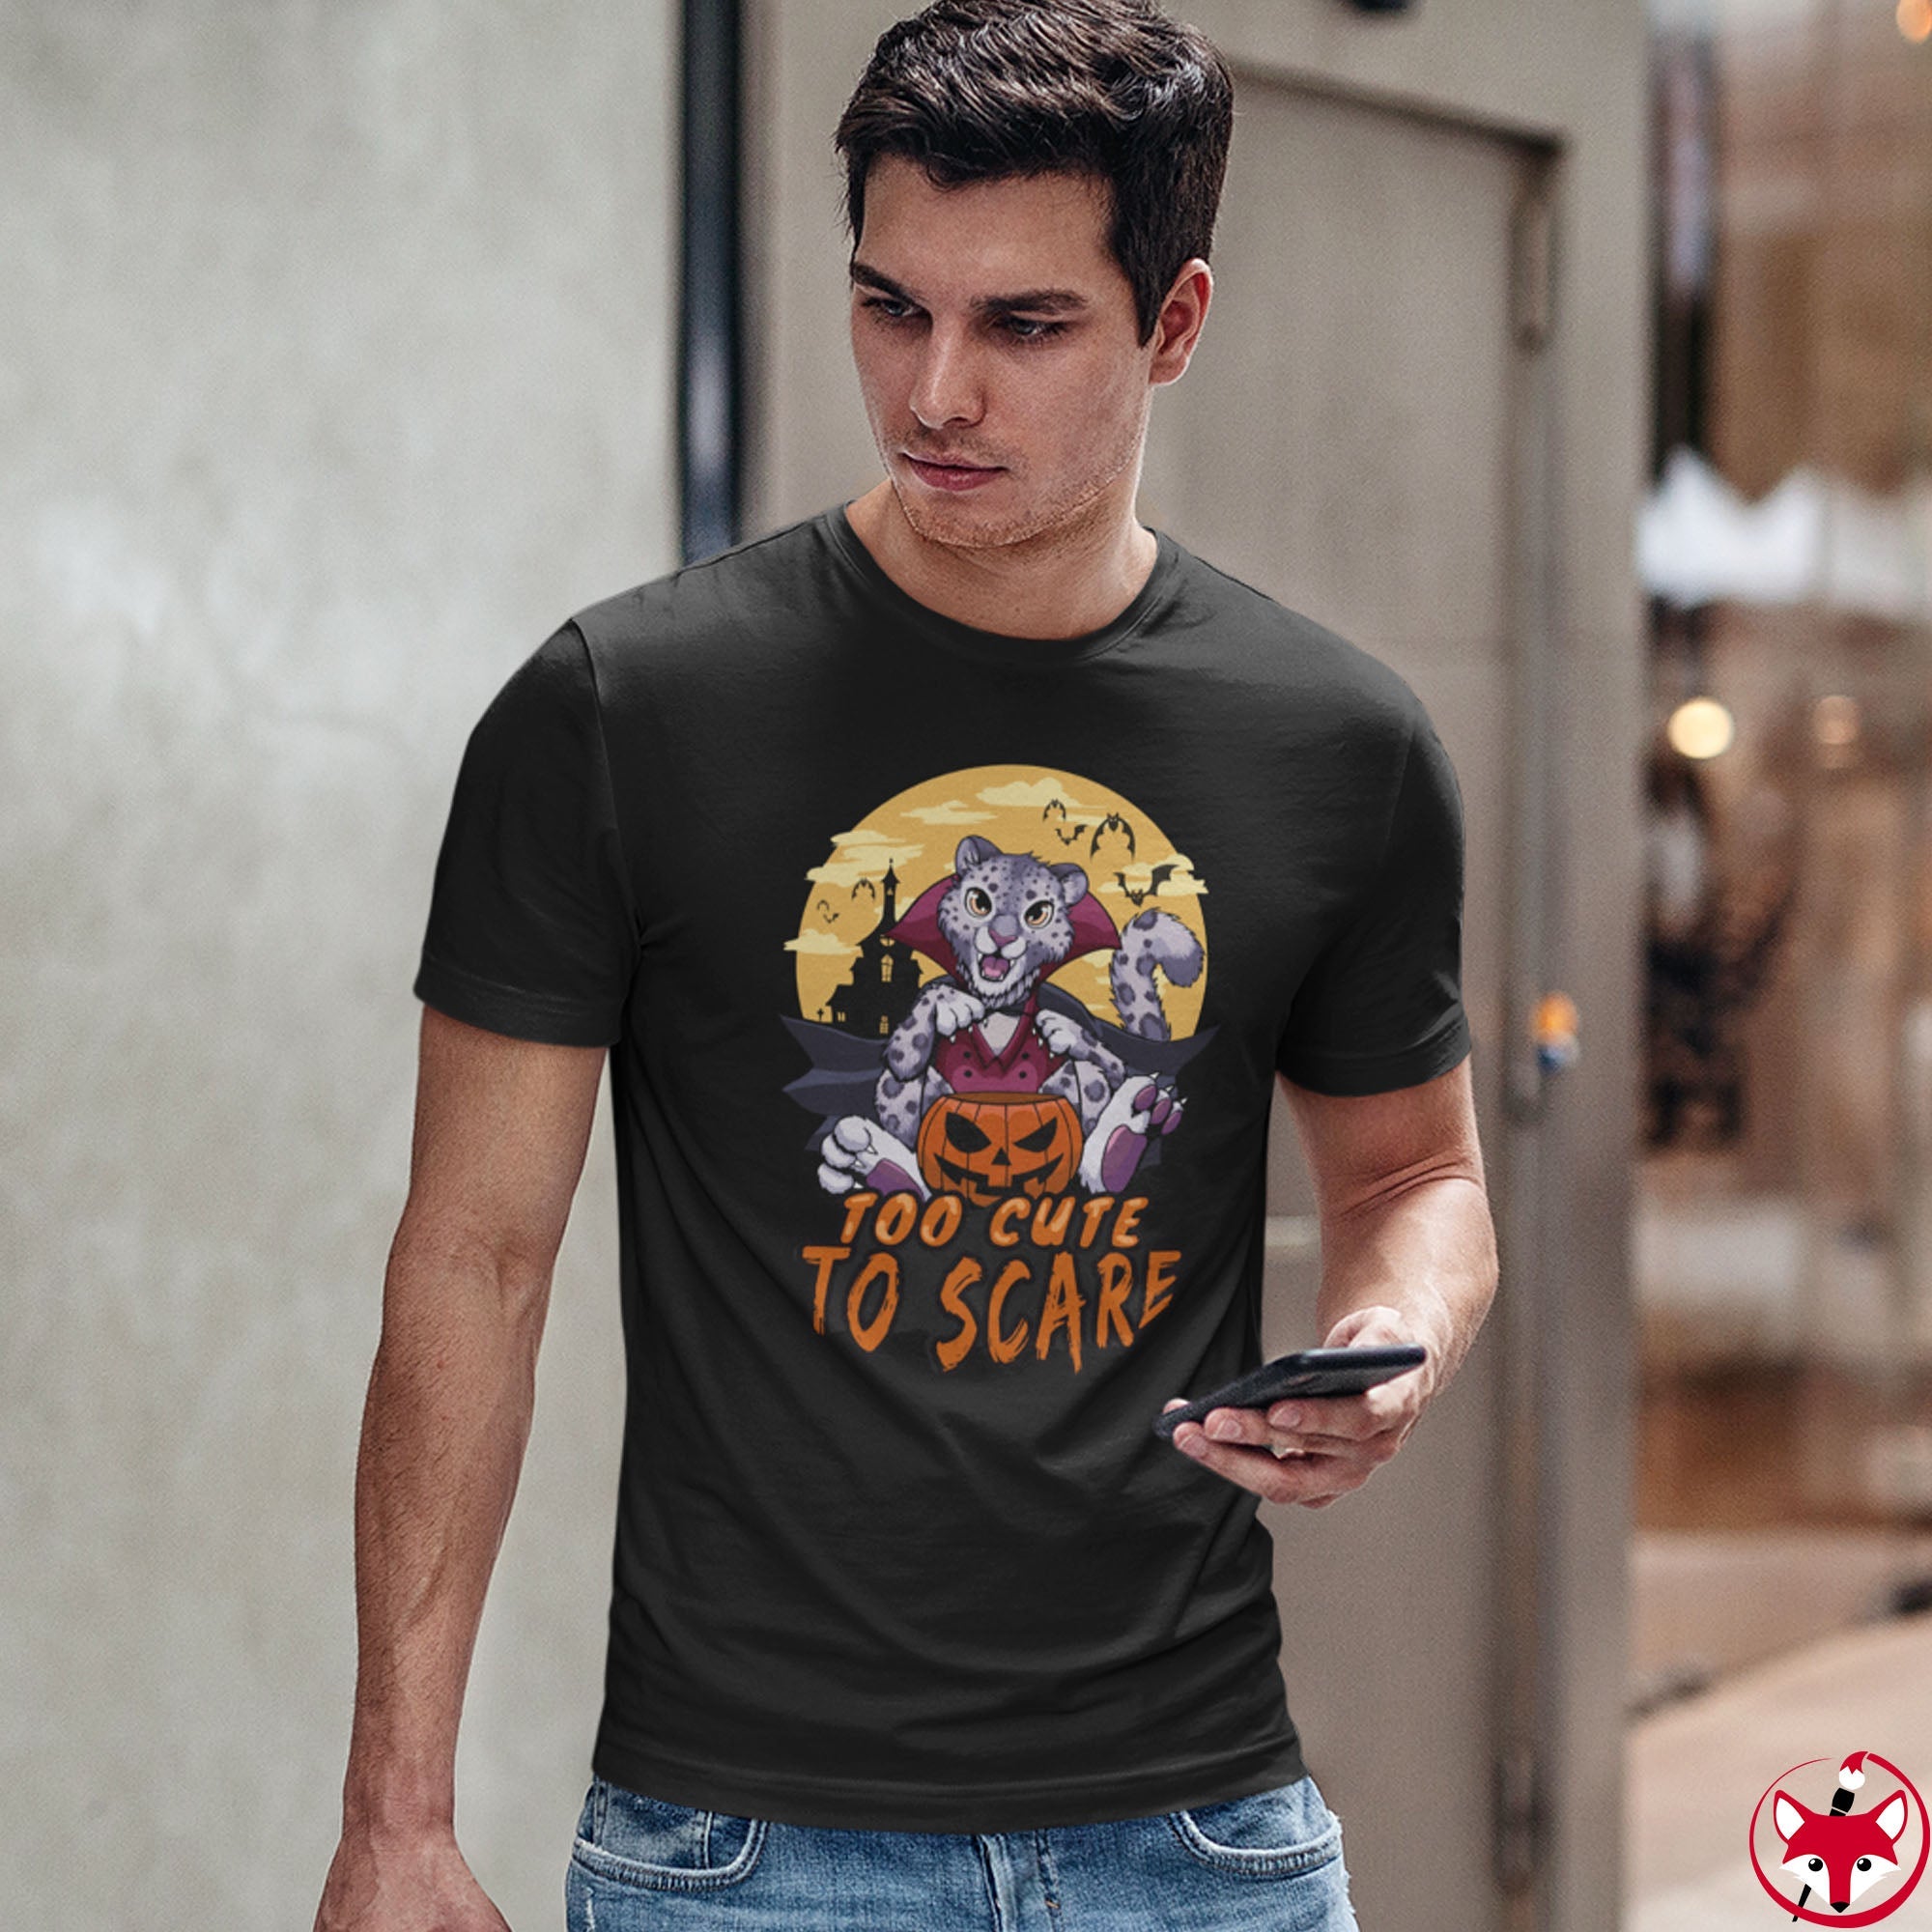 Too Cute to Scare - T-Shirt T-Shirt Artworktee 